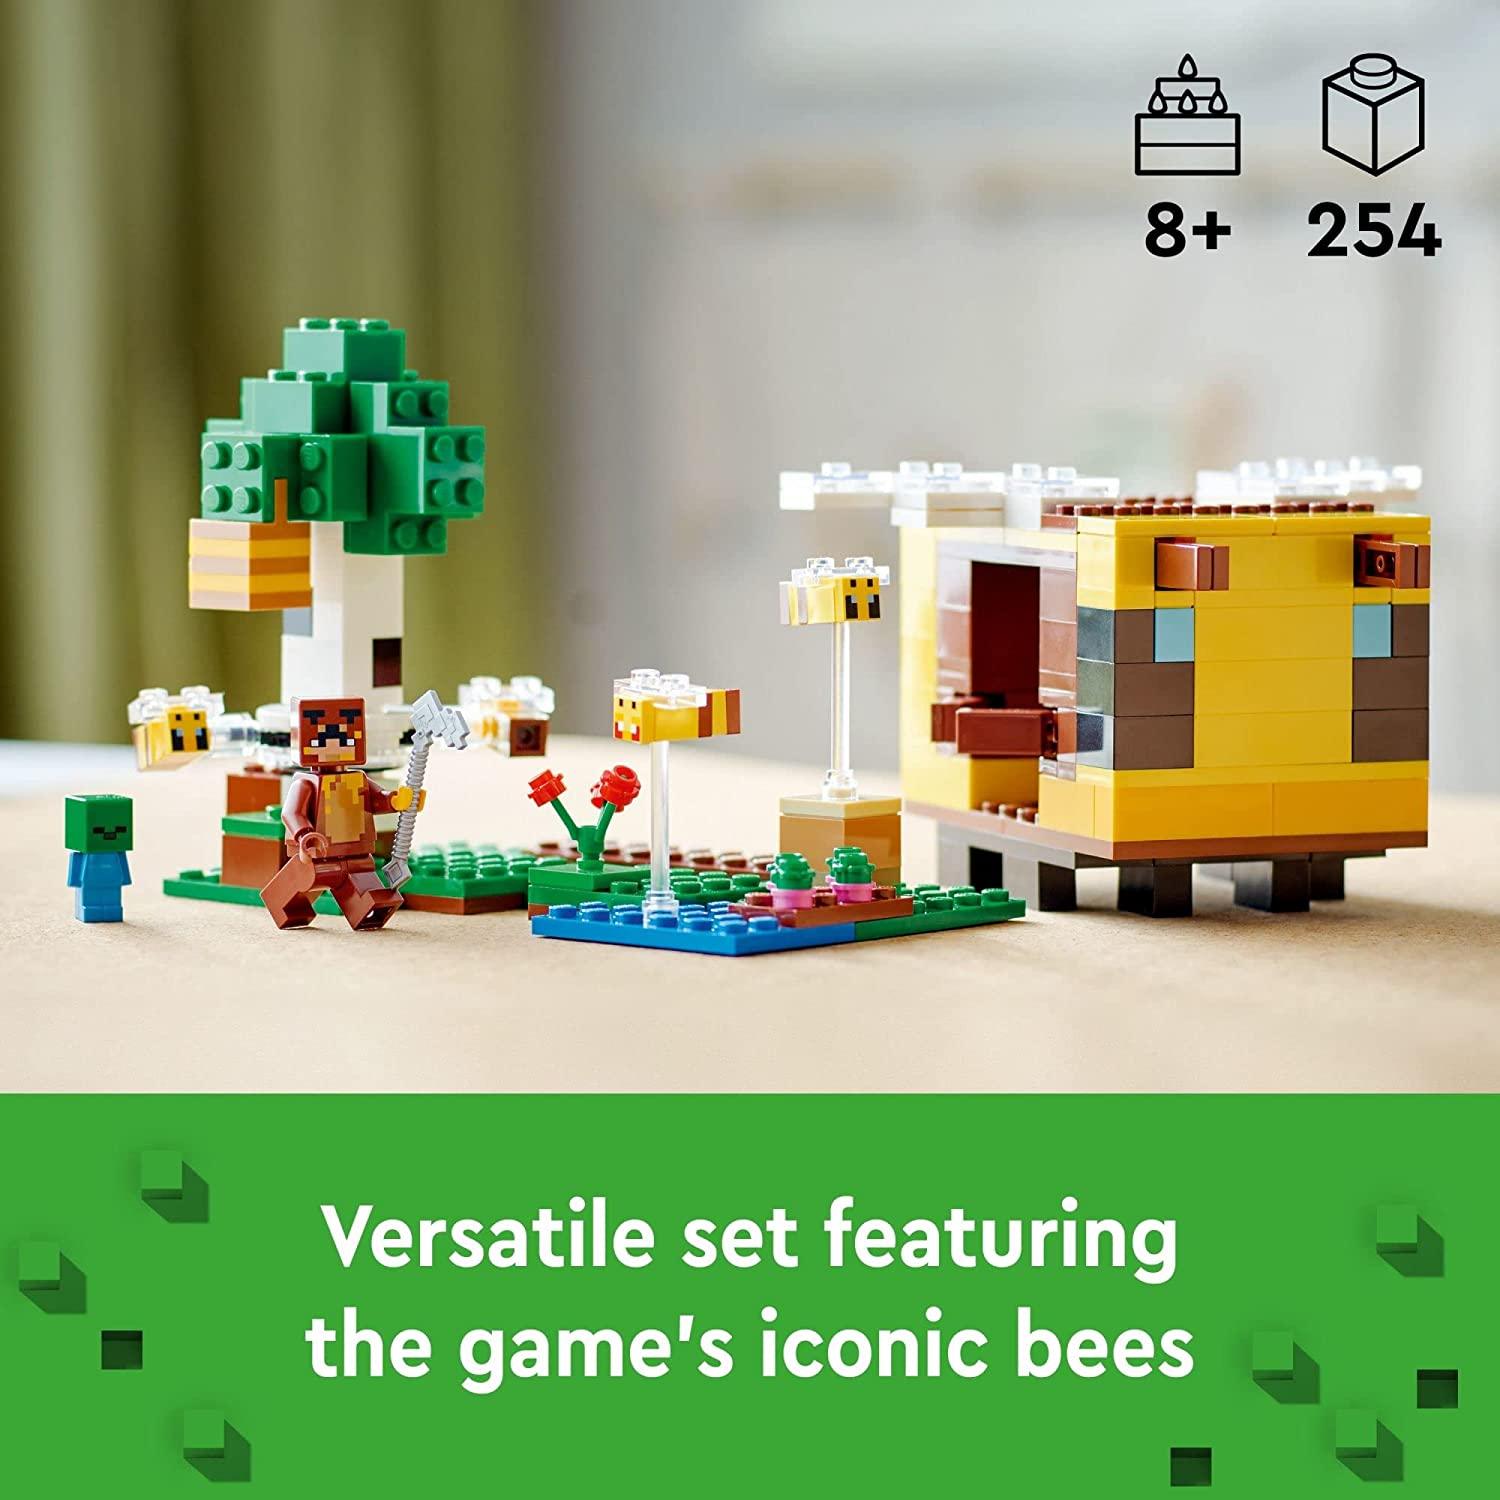 LEGO 21241 Minecraft The Bee Cottage, Construction Toy with Buildable House, Farm, Baby Zombie and Animal Figures - BumbleToys - 6+ Years, 8+ Years, 8-13 Years, Boys, LEGO, Minecraft, OXE, Pre-Order